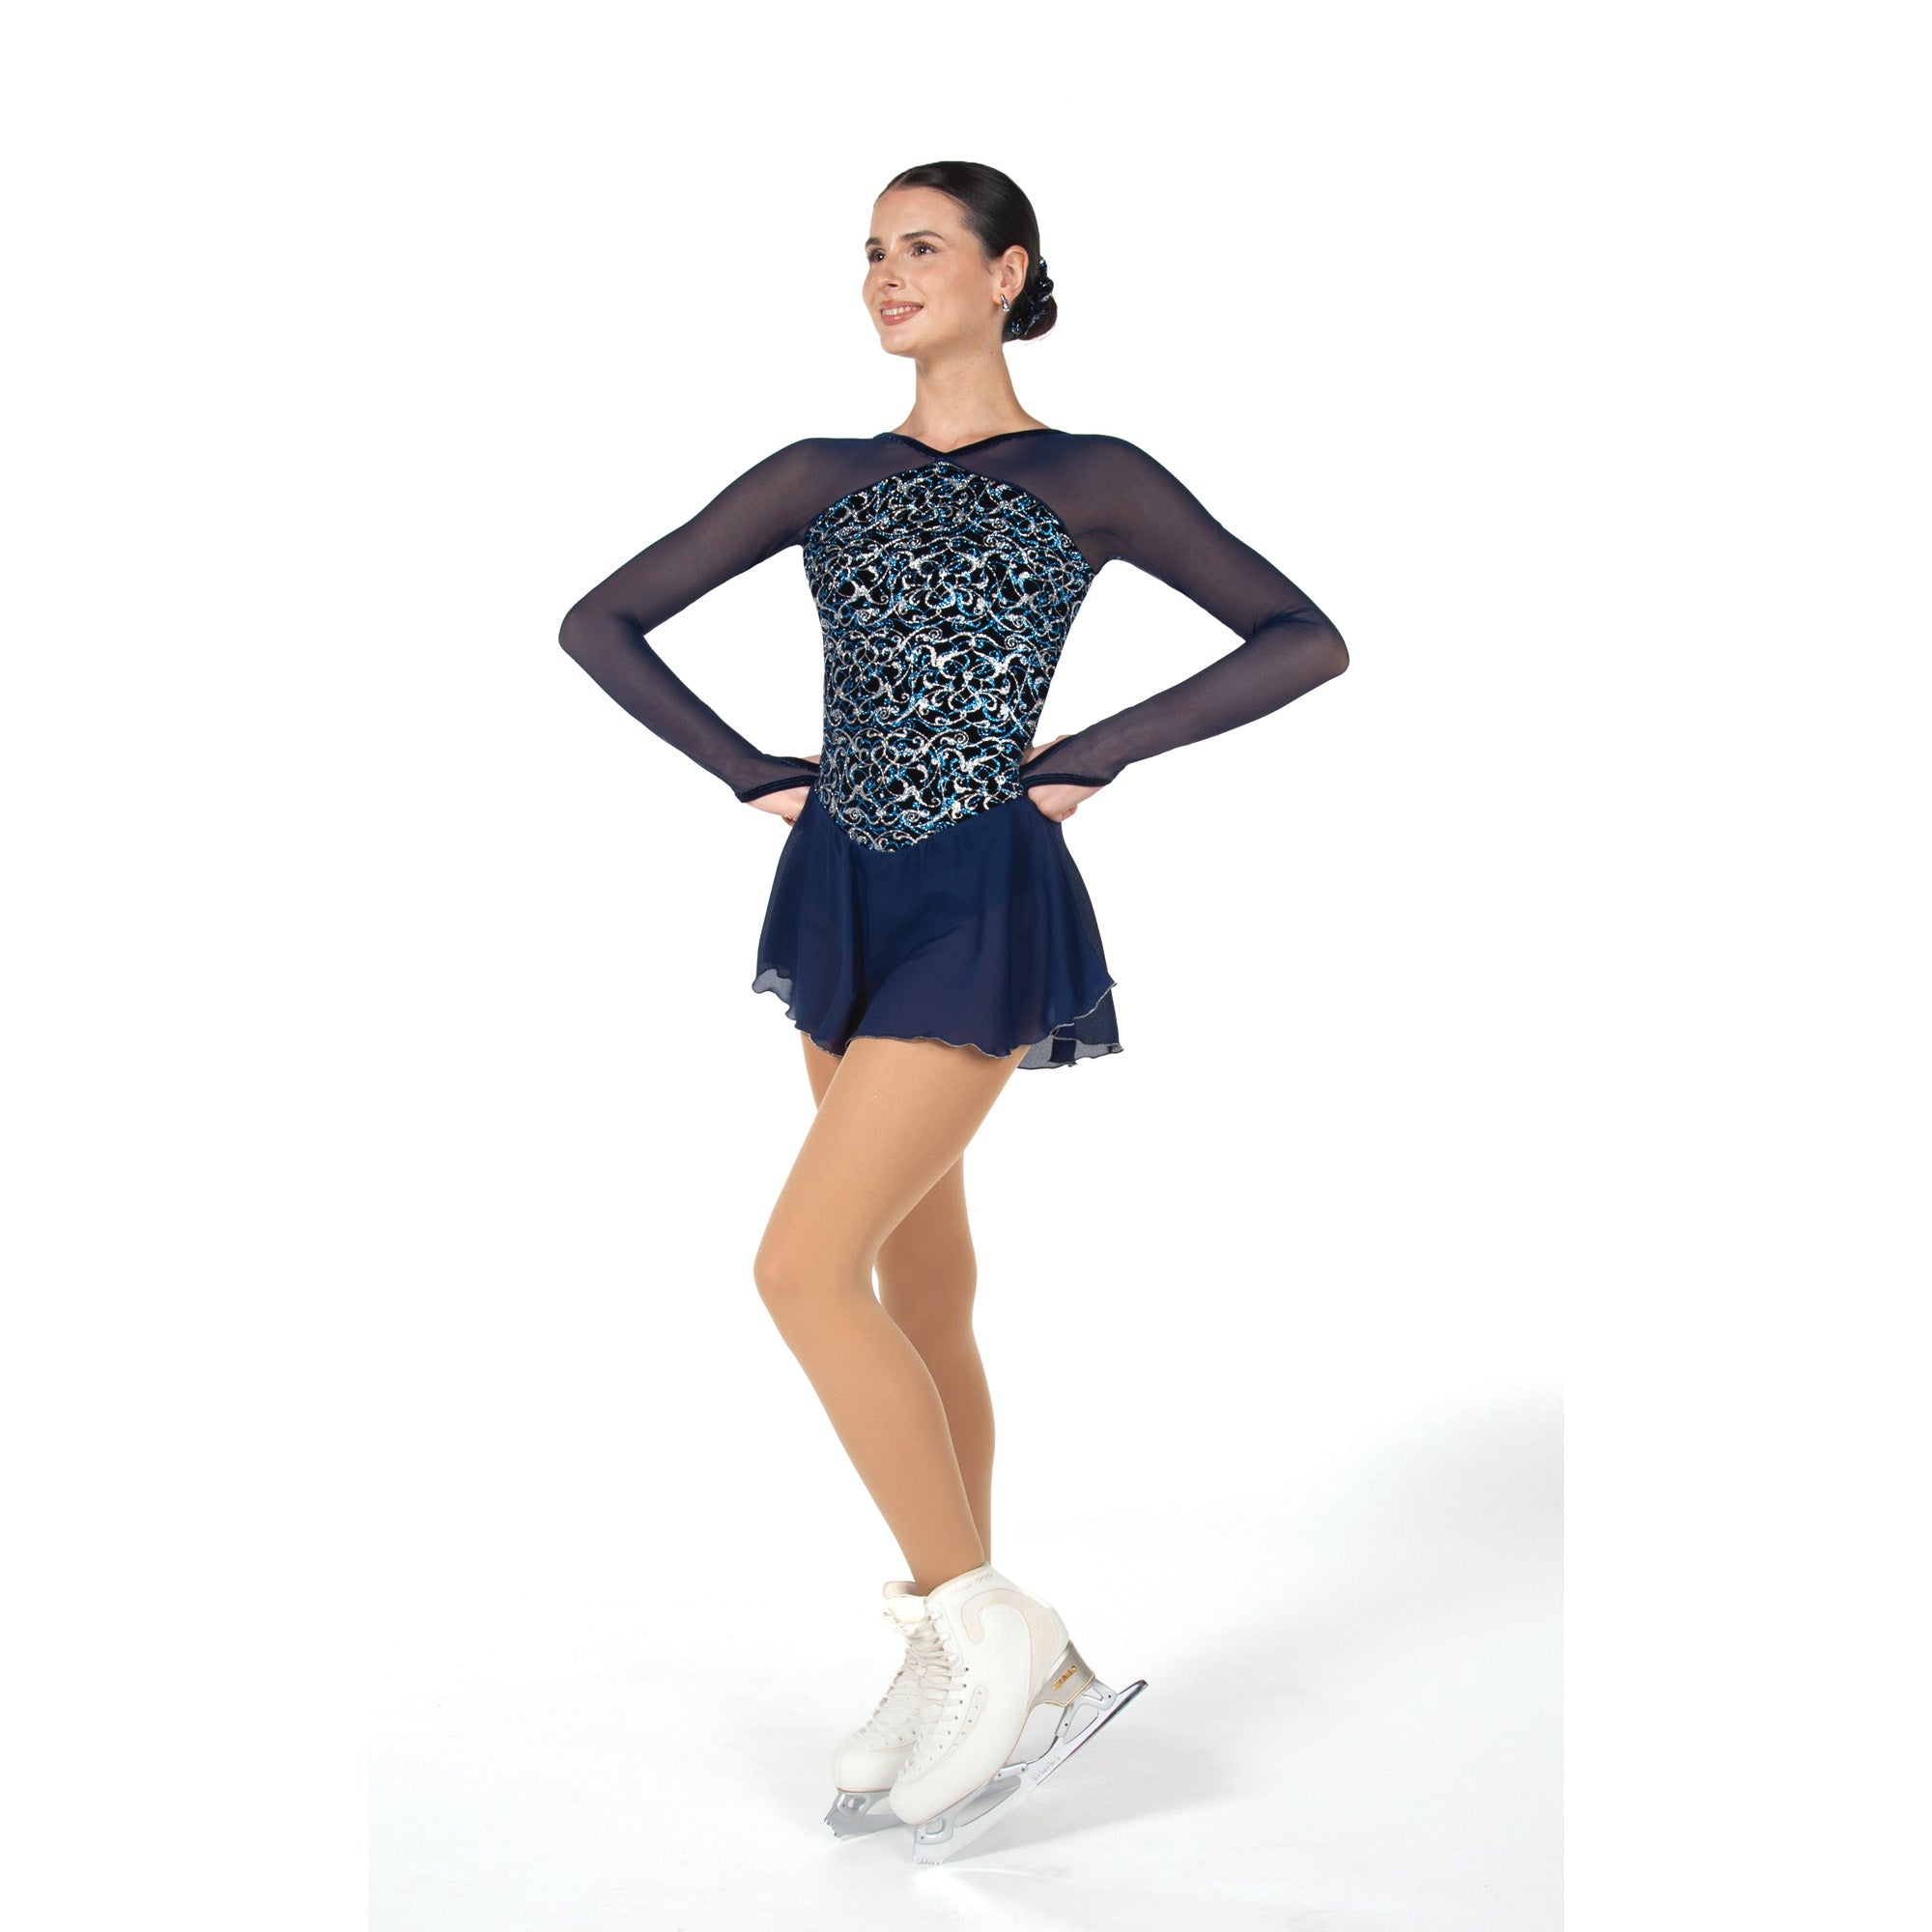 537 Vignette Skating Dress in Navy Blue by Jerry's